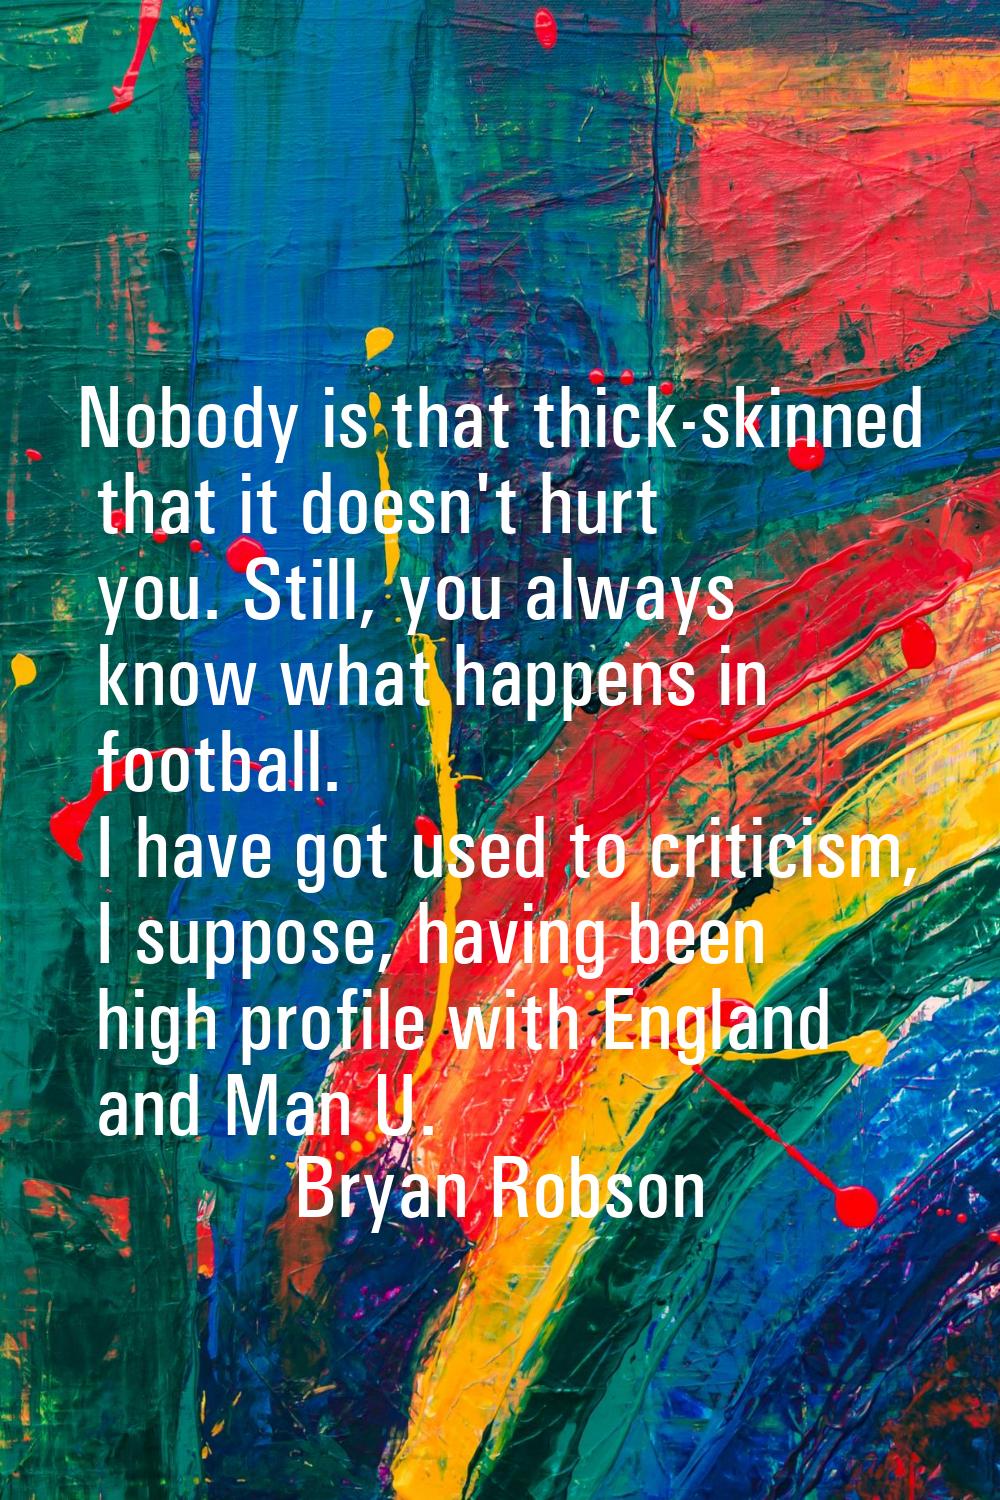 Nobody is that thick-skinned that it doesn't hurt you. Still, you always know what happens in footb